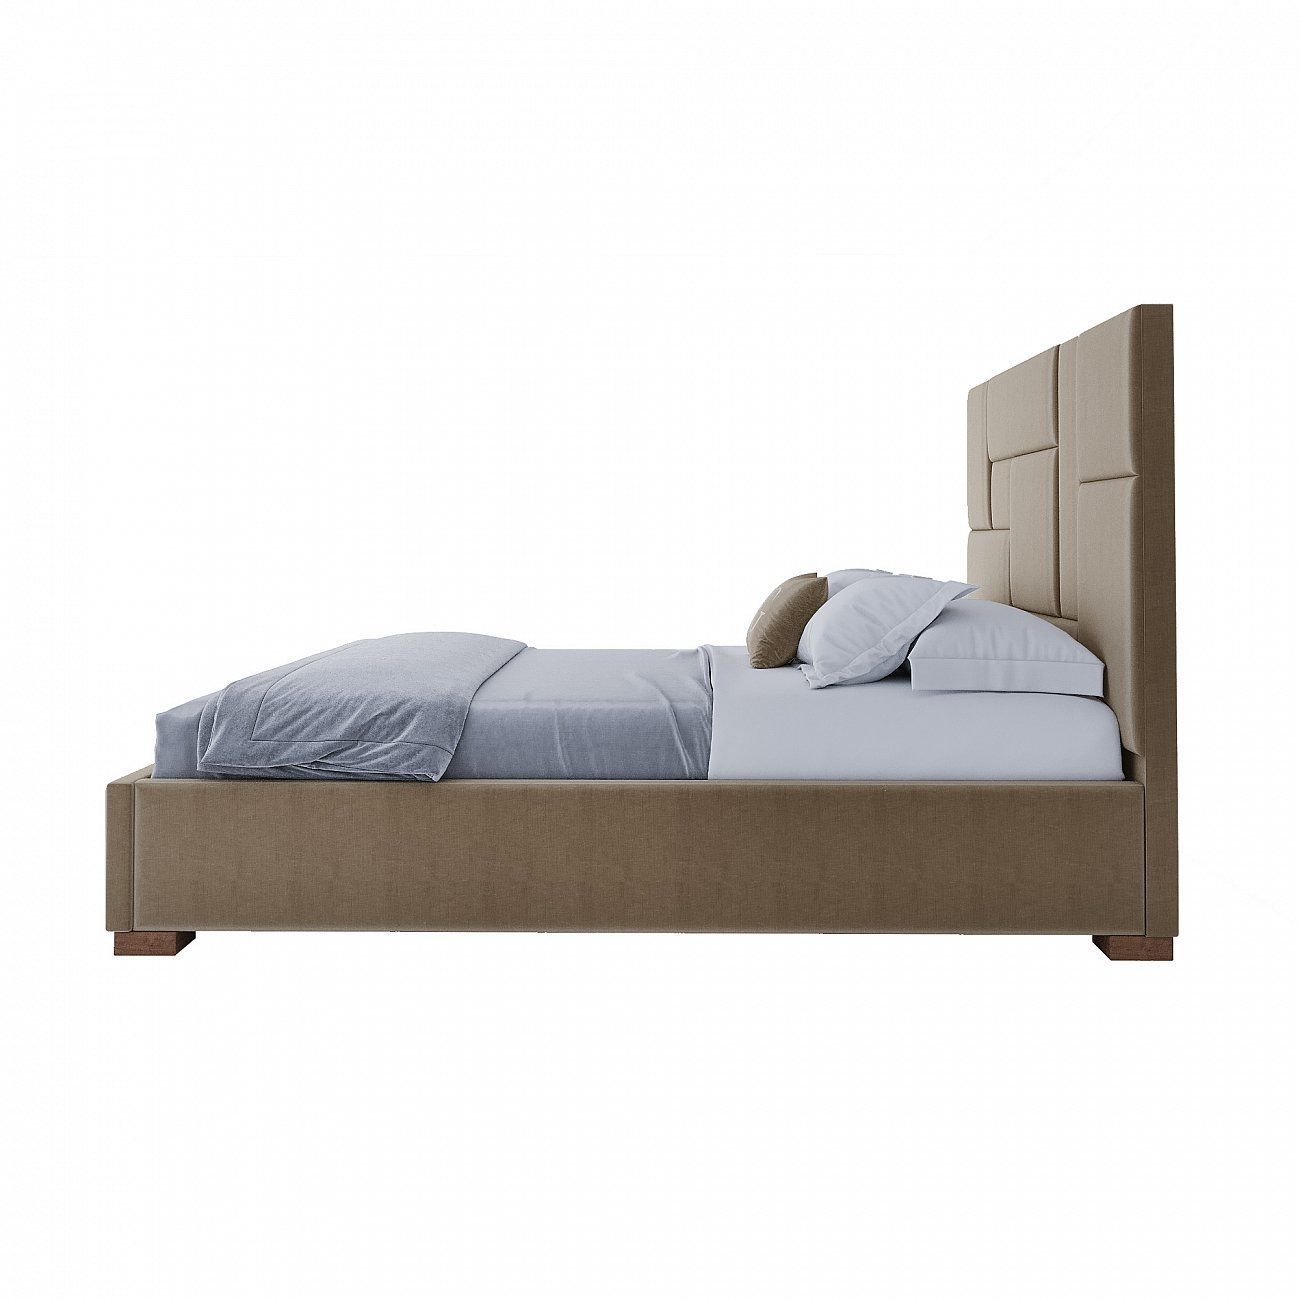 Double bed with upholstered headboard 160x200 cm beige Wax